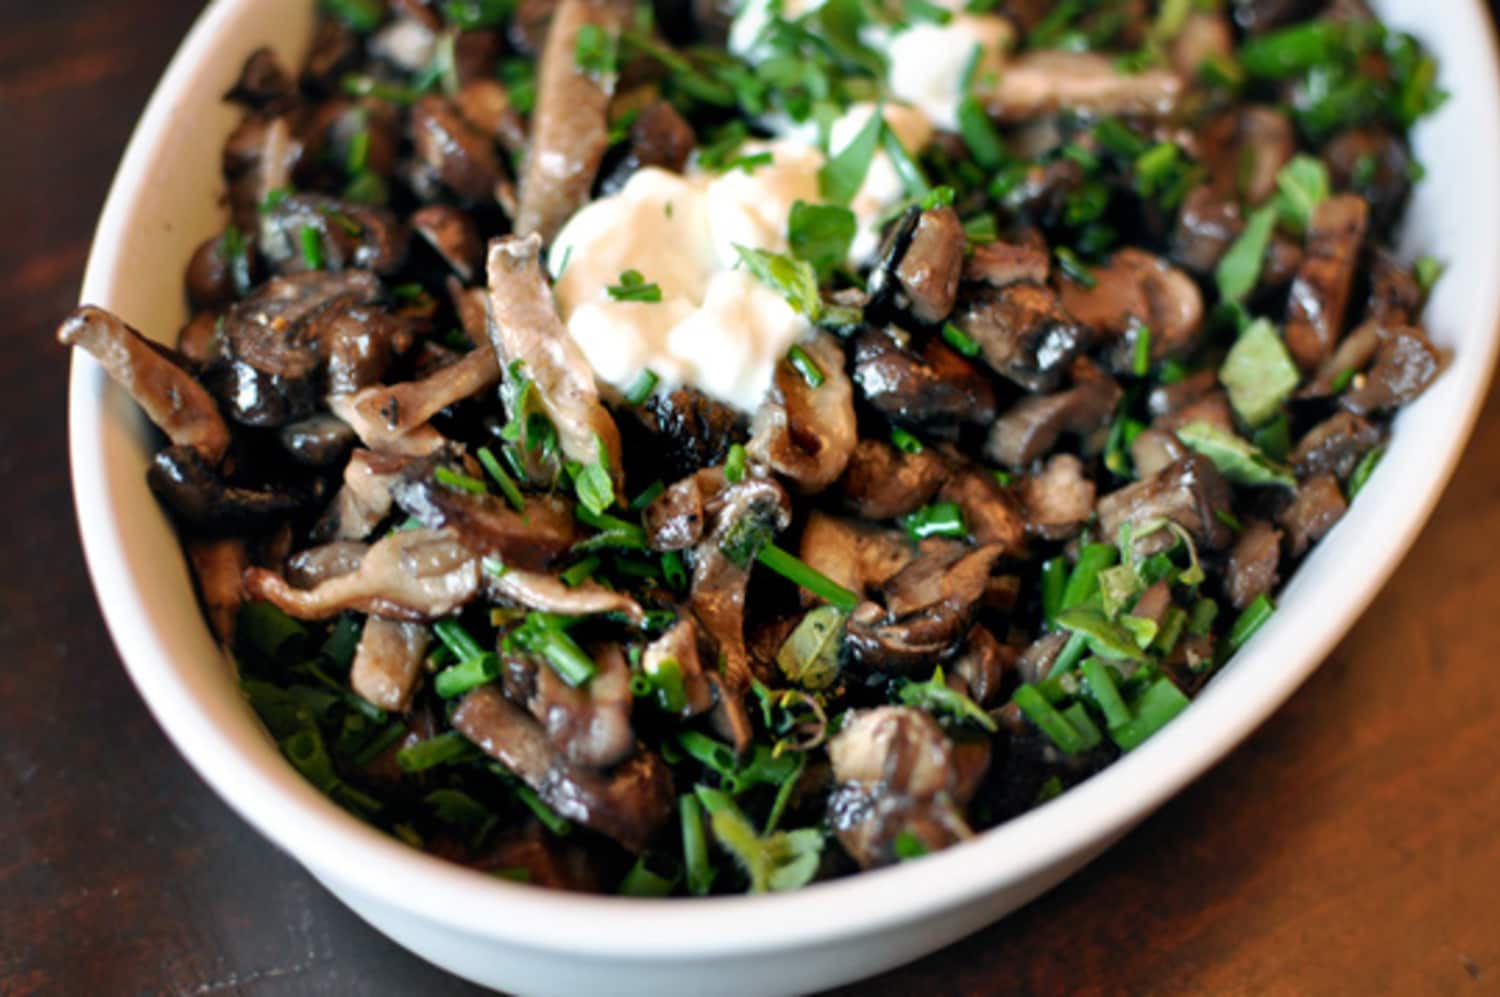 Quick Dinner Recipe: Roasted Mushrooms with Herbs | Kitchn